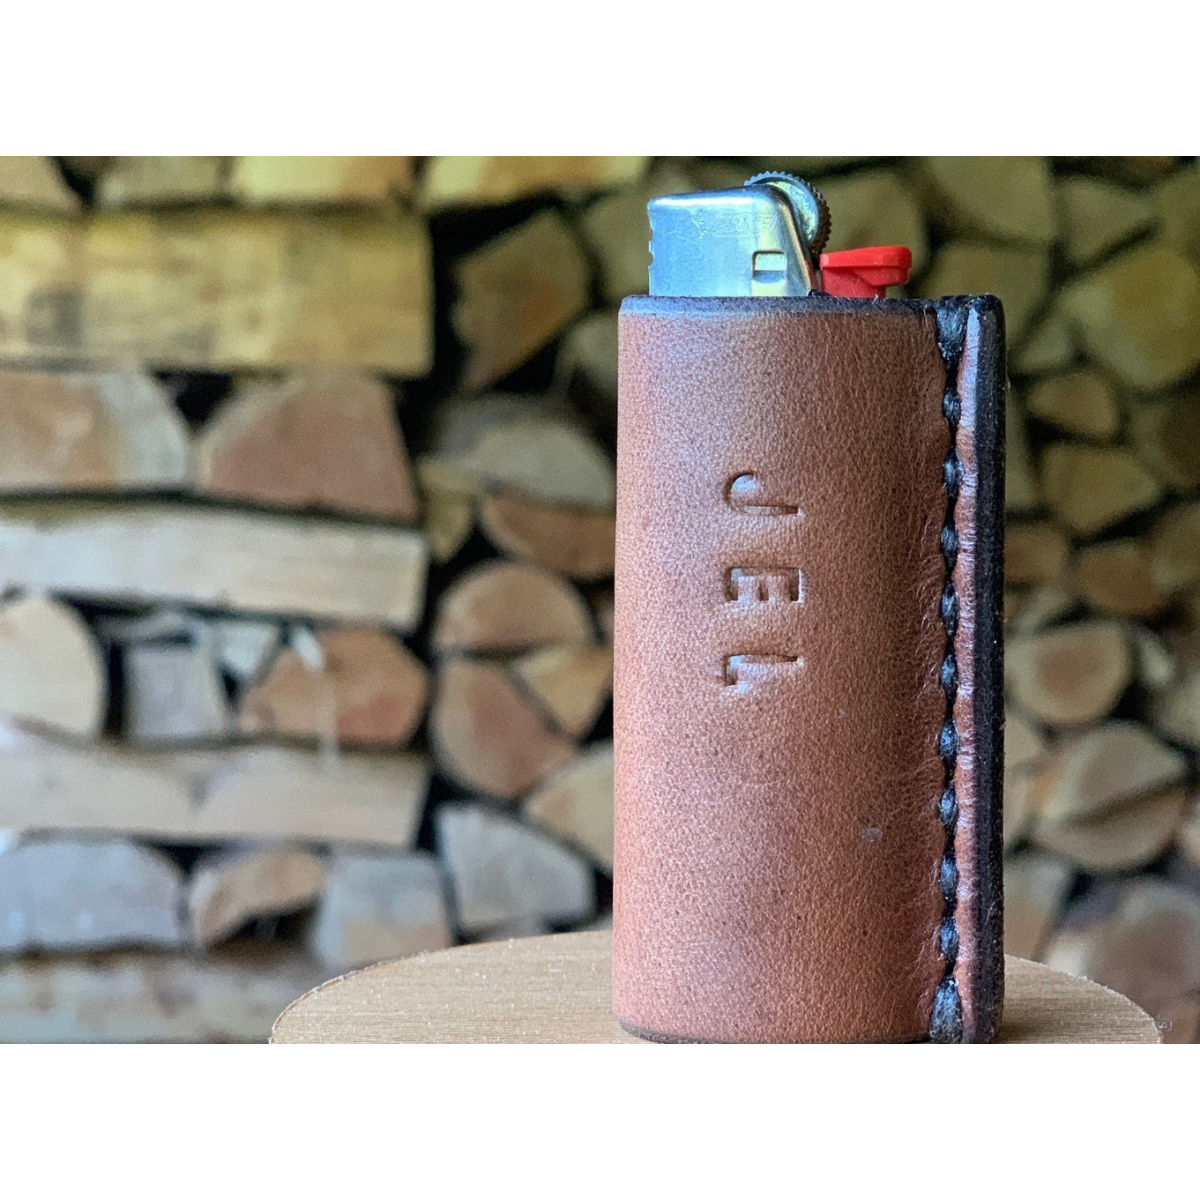 Leather Case fits Standard Size BIC Lighters Custom Made